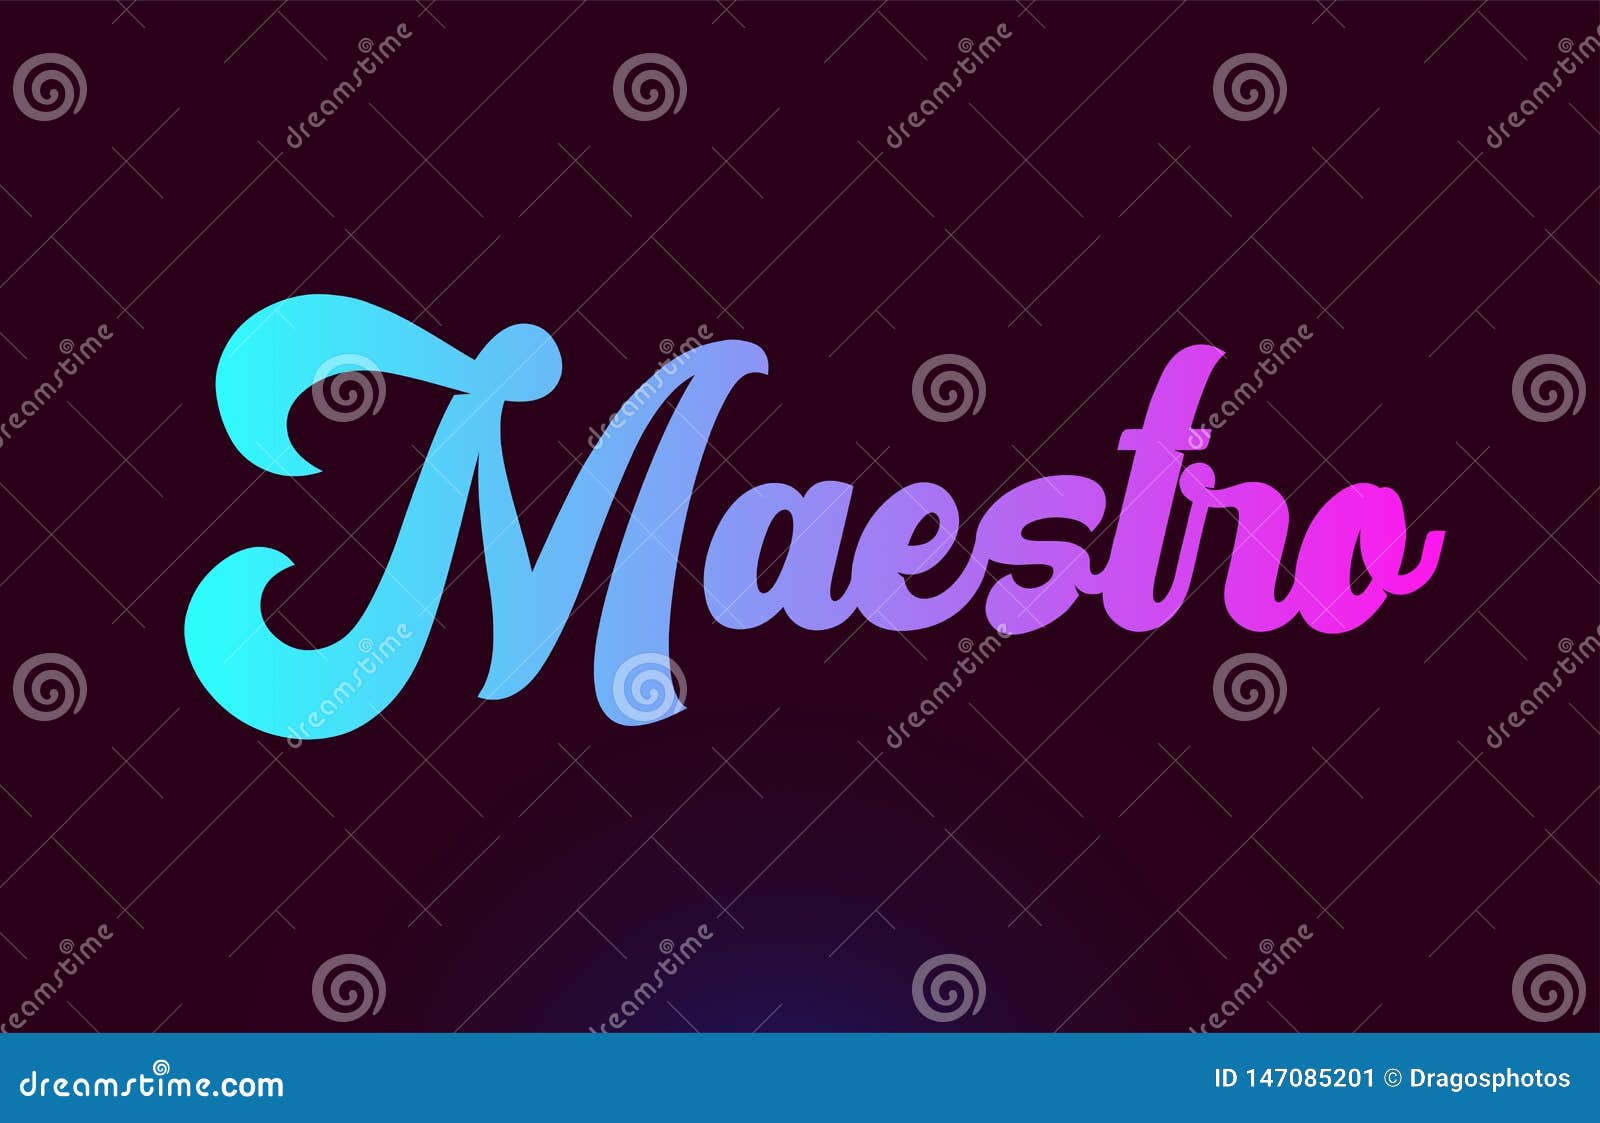 maestro pink word text logo icon  for typography